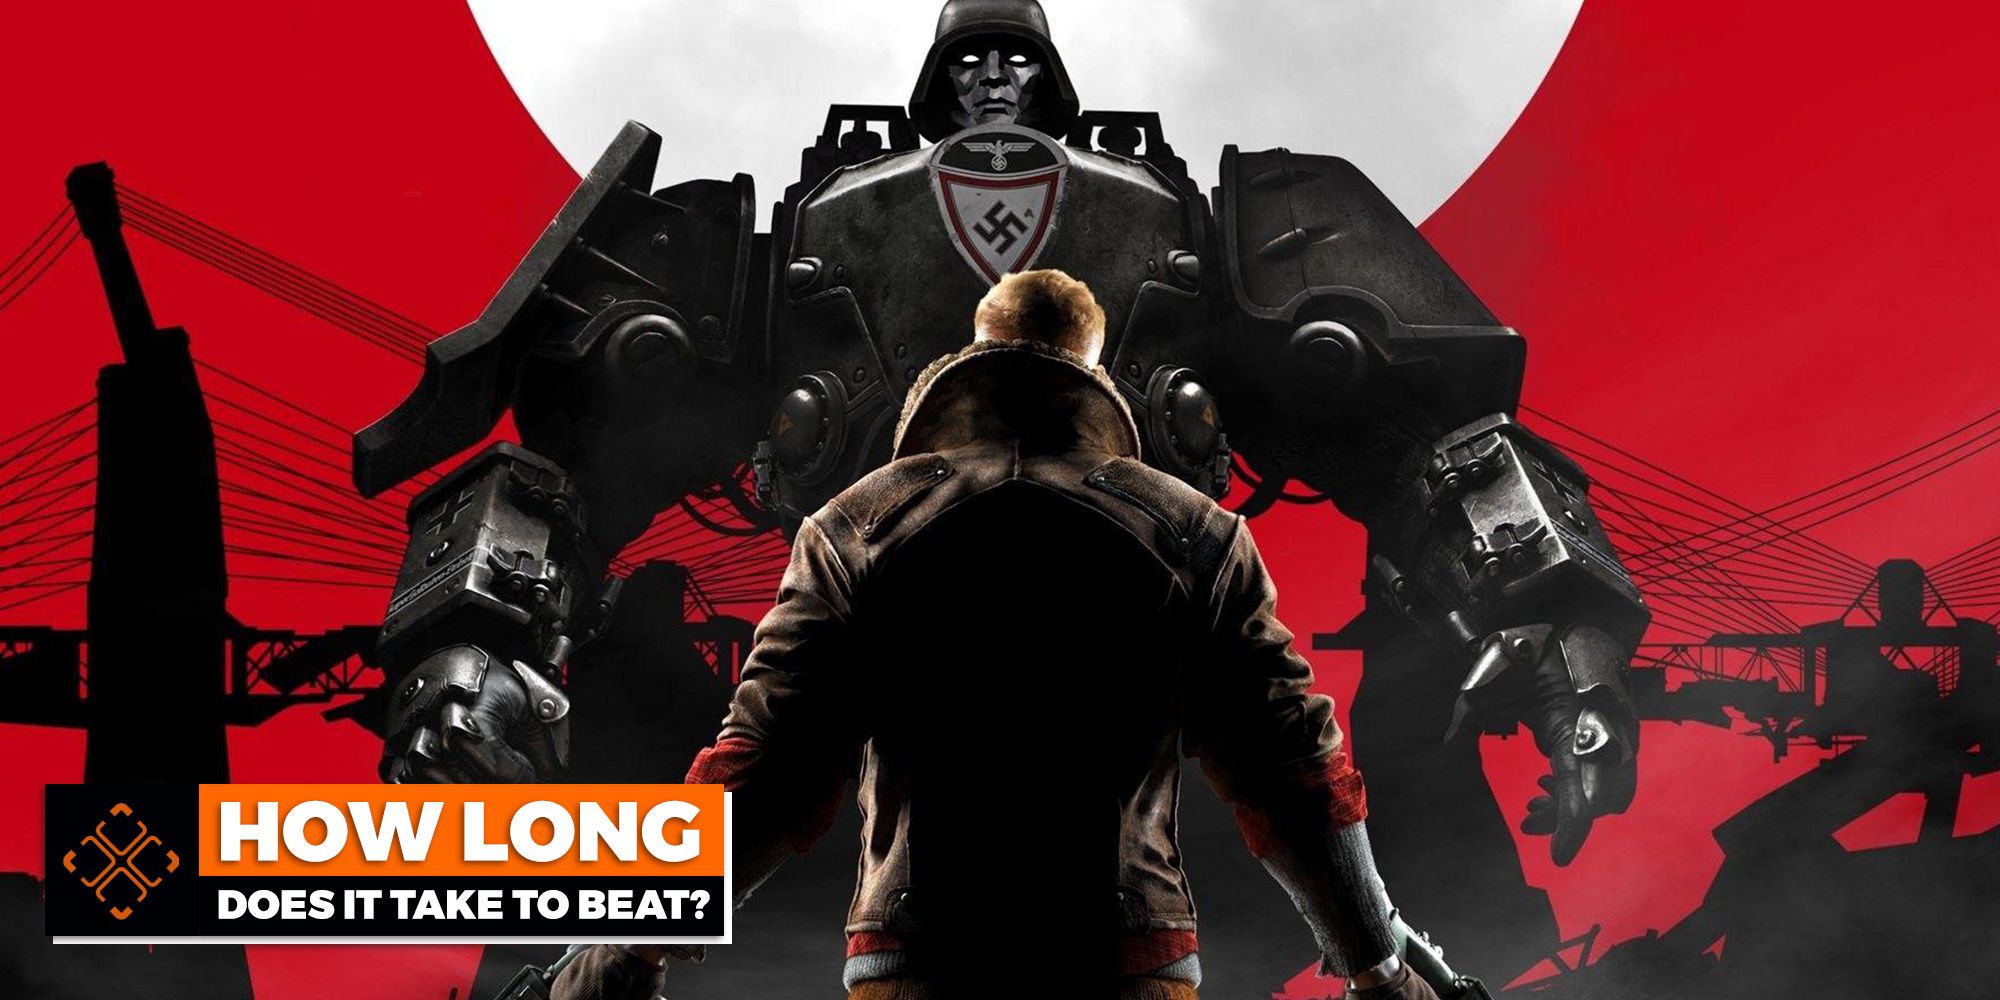 Wolfenstein: The New Order All The Enigma Codes 